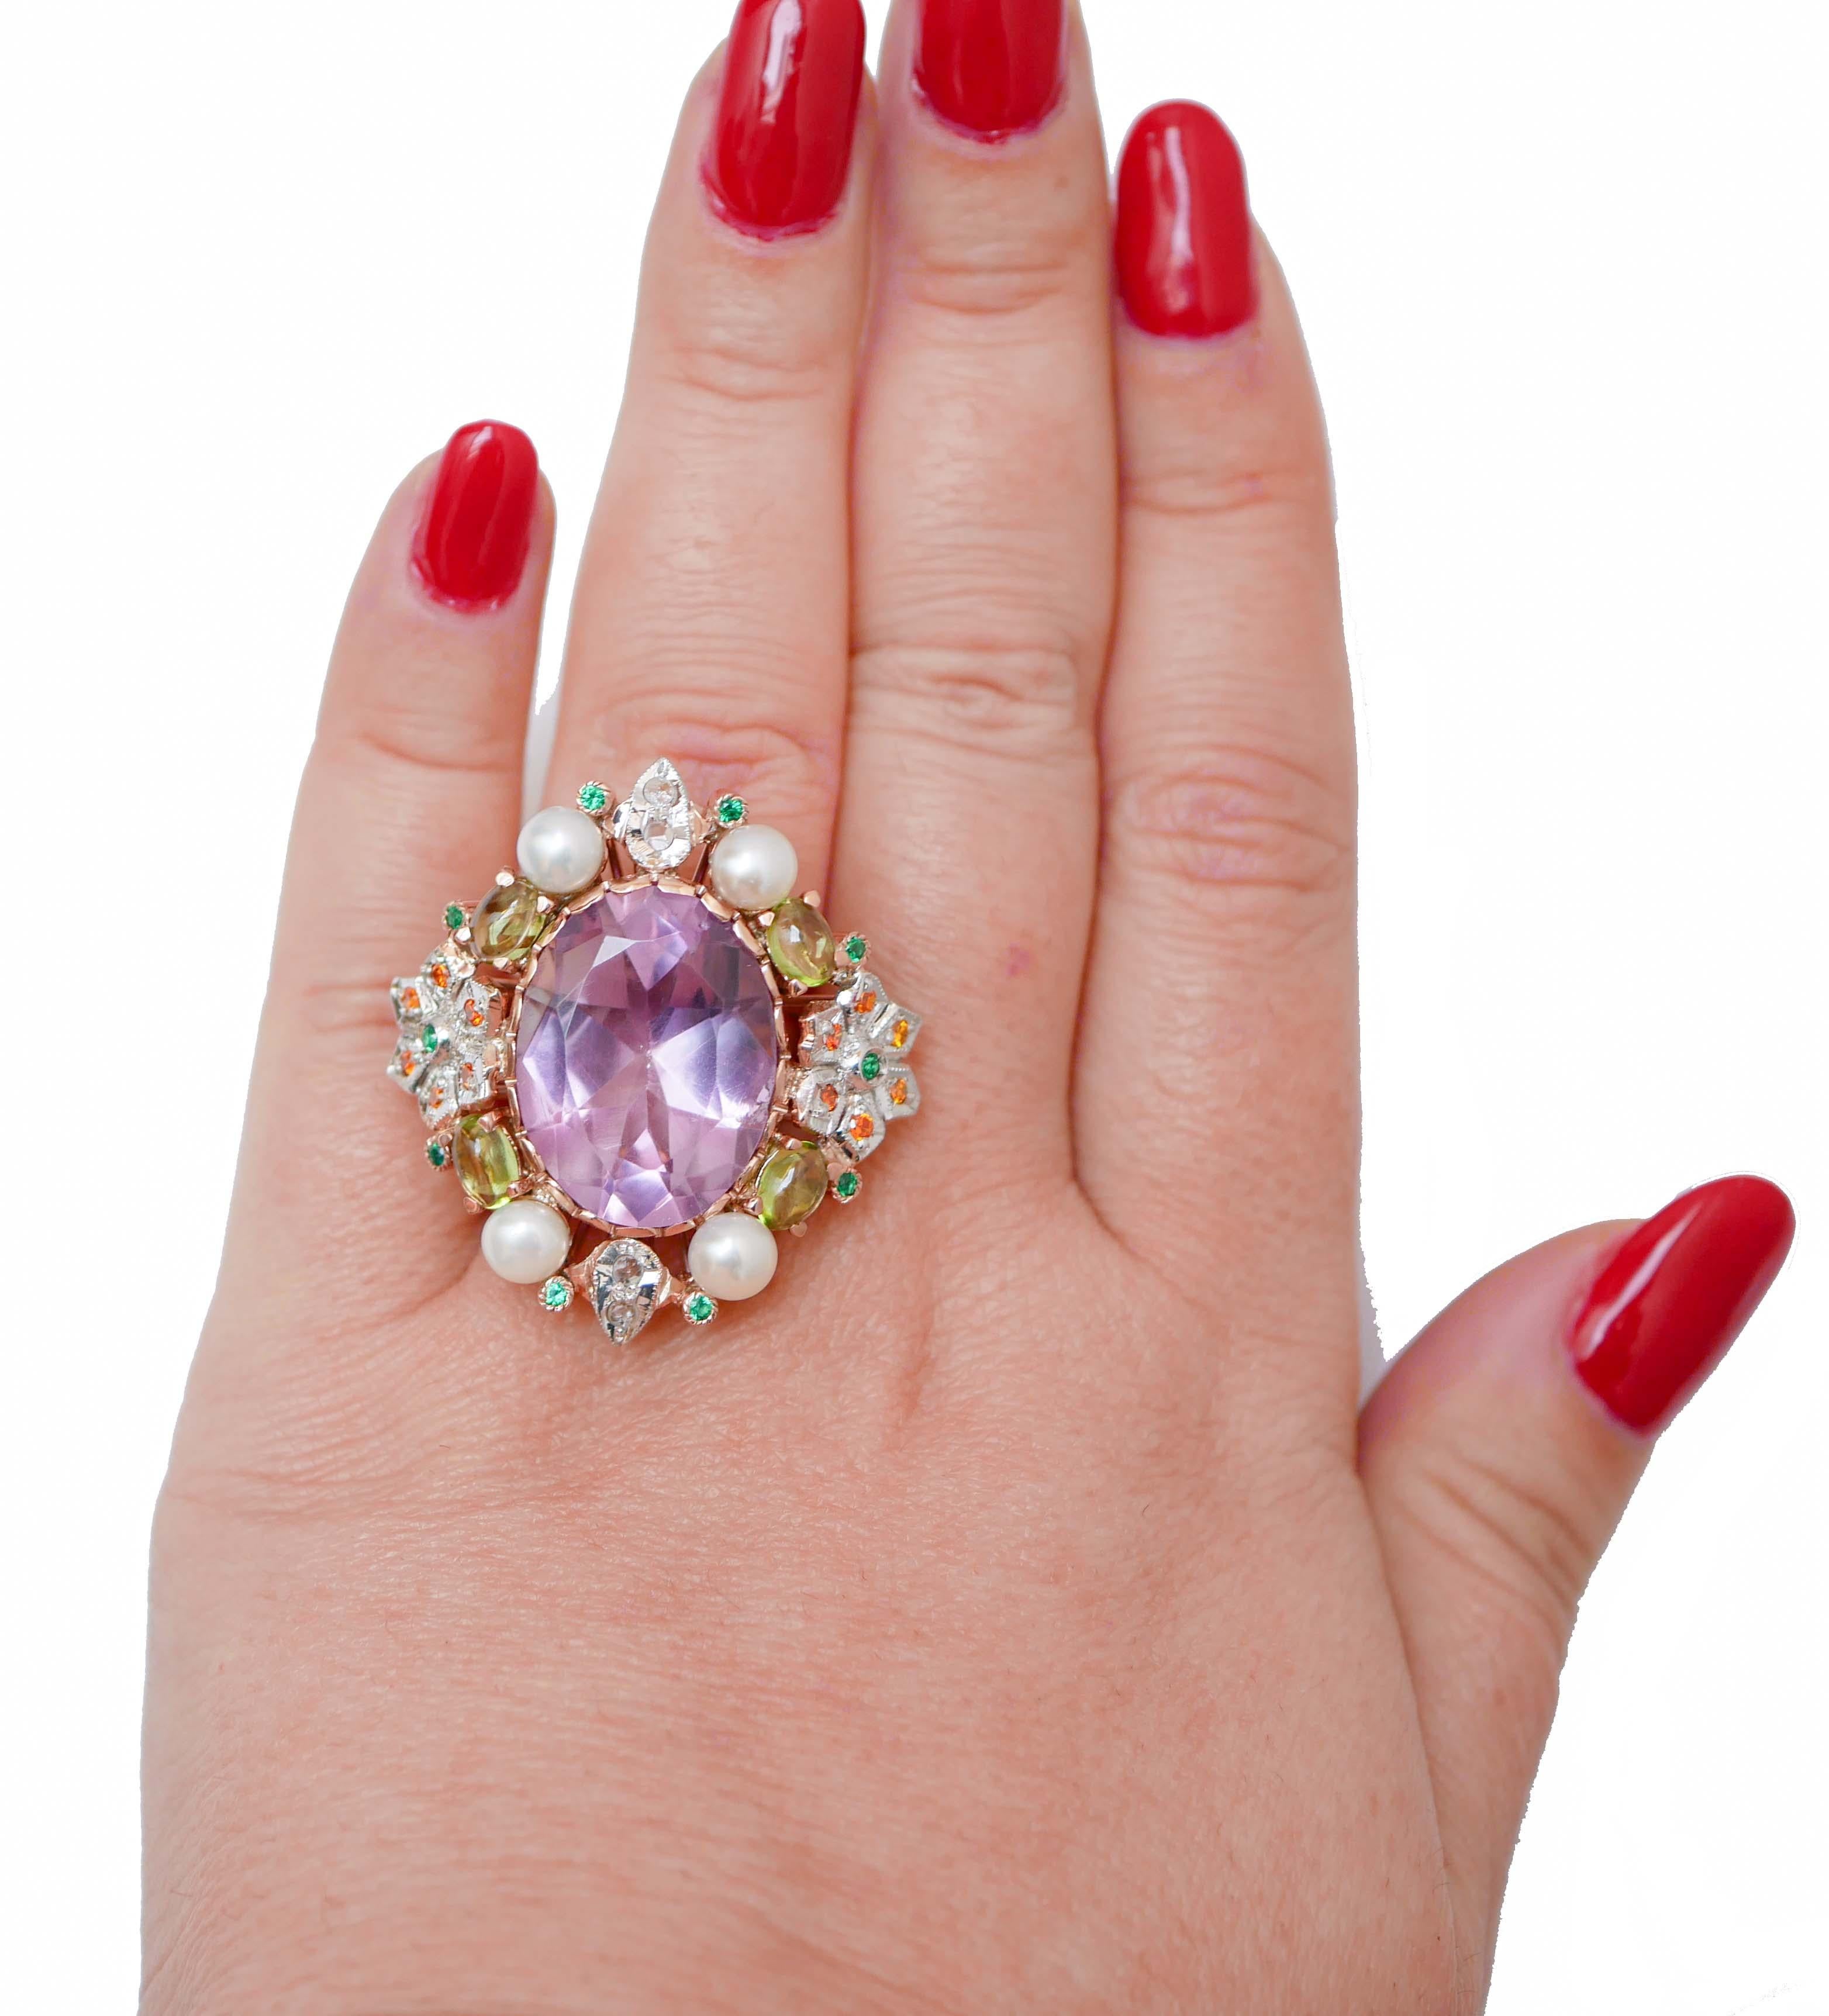 Mixed Cut Amethyst, Peridots, Pearls, Stones,  Diamonds, Rose Gold and Silver  Ring. For Sale